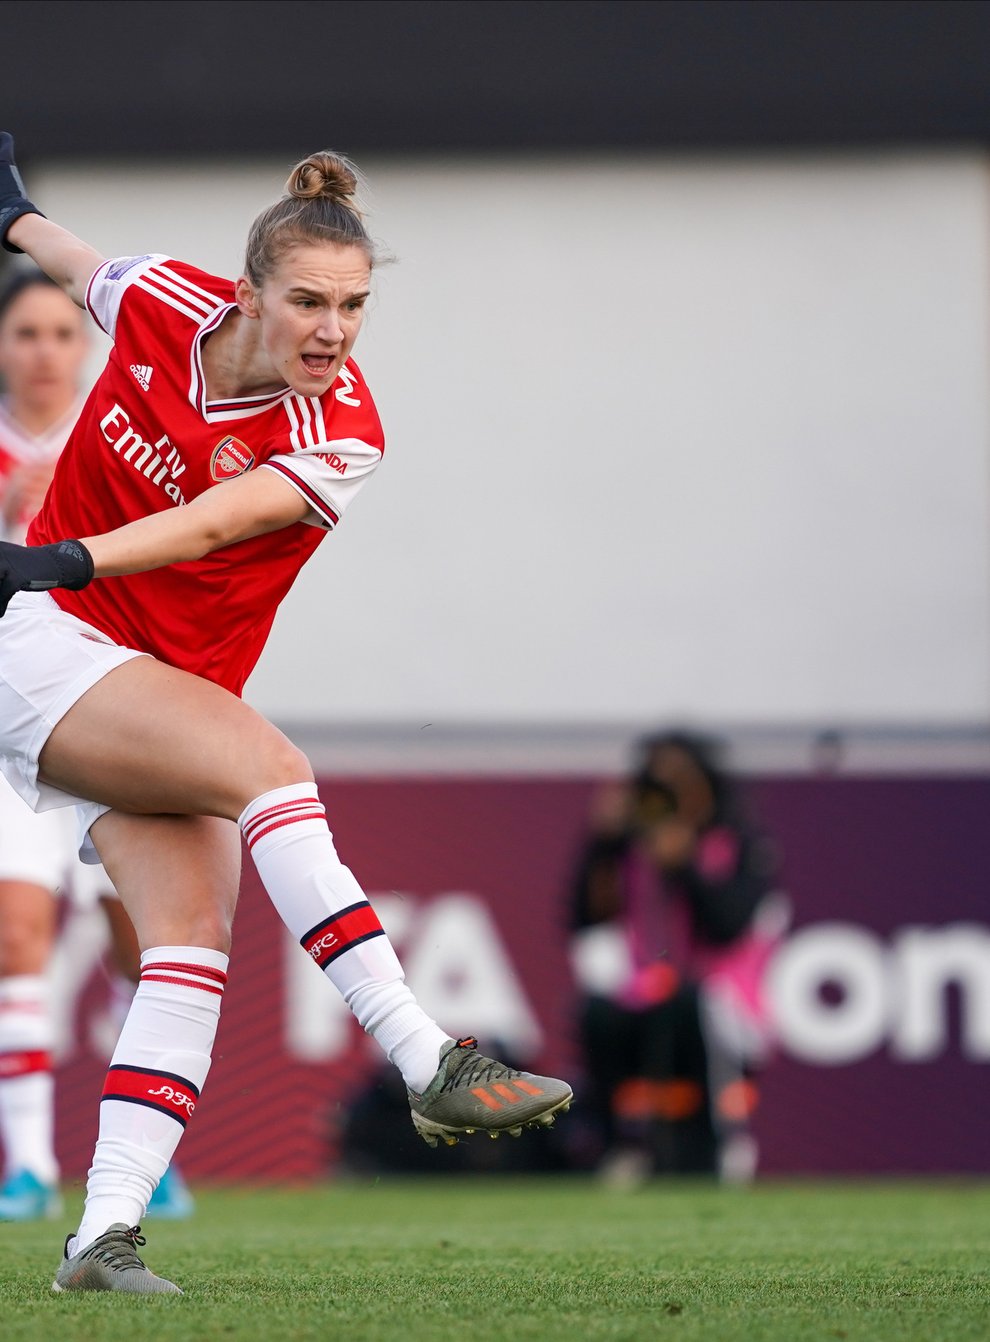 Miedema was the joint-top scorer in the Women's Super League this season alongside Chelsea's Bethany England